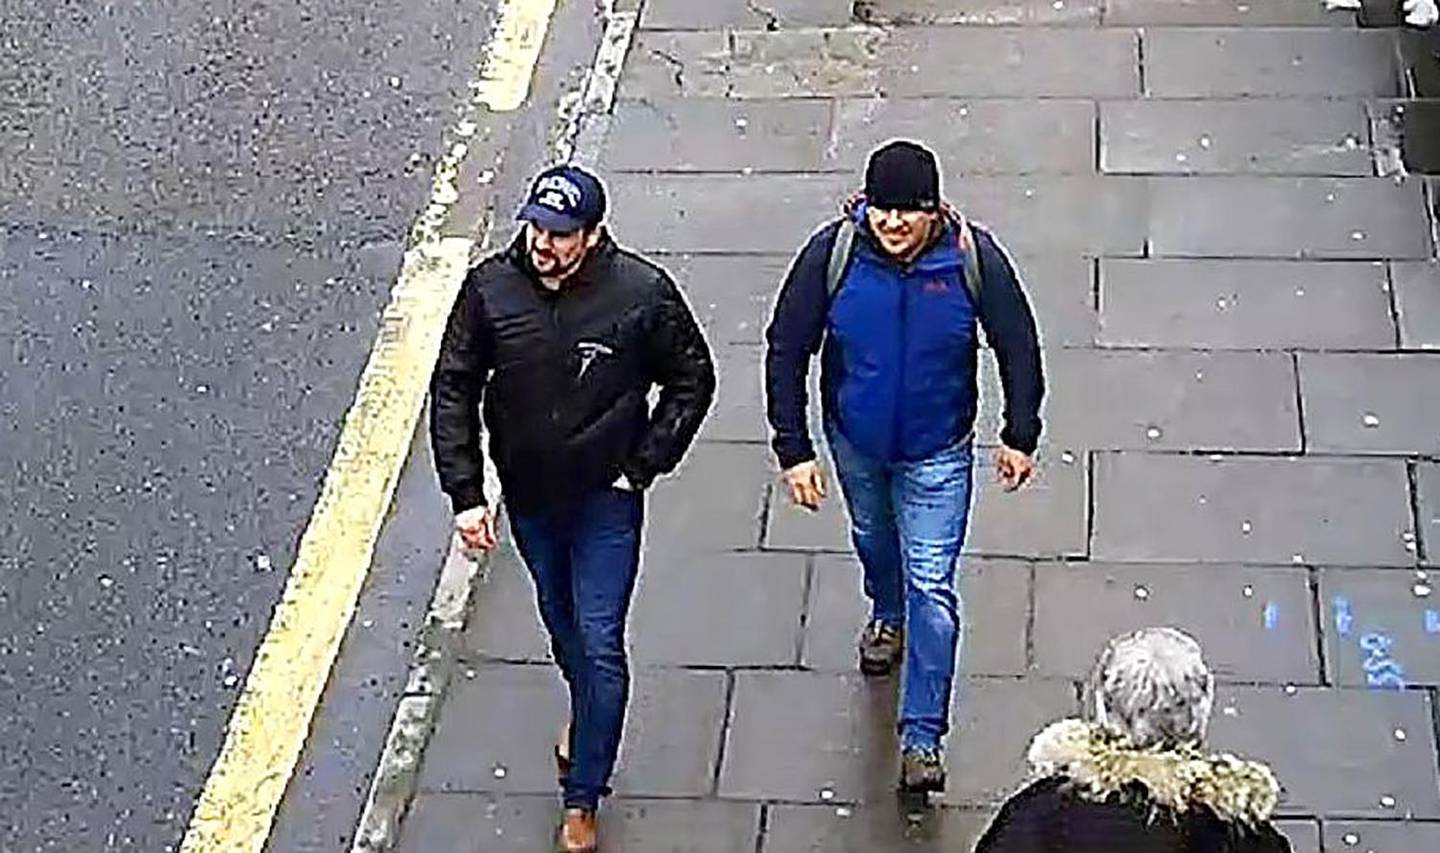 TOPSHOT - A handout picture taken on Fisherton Road in Salisbury, west of London on March 4, 2018, and released by the British Metropolitan Police Service in London on September 5, 2018, shows Alexander Petrov (R) and Ruslan Boshirov, who are wanted by British police in connection with the nerve agent attack on former Russian spy Sergei Skripal and his daughter Yulia. - British prosecutors said Wednesday they have obtained a European arrest warrant for two Russians blamed for a nerve agent attack on a former spy in the city of Salisbury. Police identified Alexander Petrov and Ruslan Boshirov as the men who tried to kill Russian former double agent Sergei Skripal and his daughter Yulia with Novichok in March 2018. (Photo by HO / Metropolitan Police Service / AFP) / RESTRICTED TO EDITORIAL USE - MANDATORY CREDIT  " AFP PHOTO / Metropolitan Police Service"  -  NO MARKETING NO ADVERTISING CAMPAIGNS   -   DISTRIBUTED AS A SERVICE TO CLIENTS